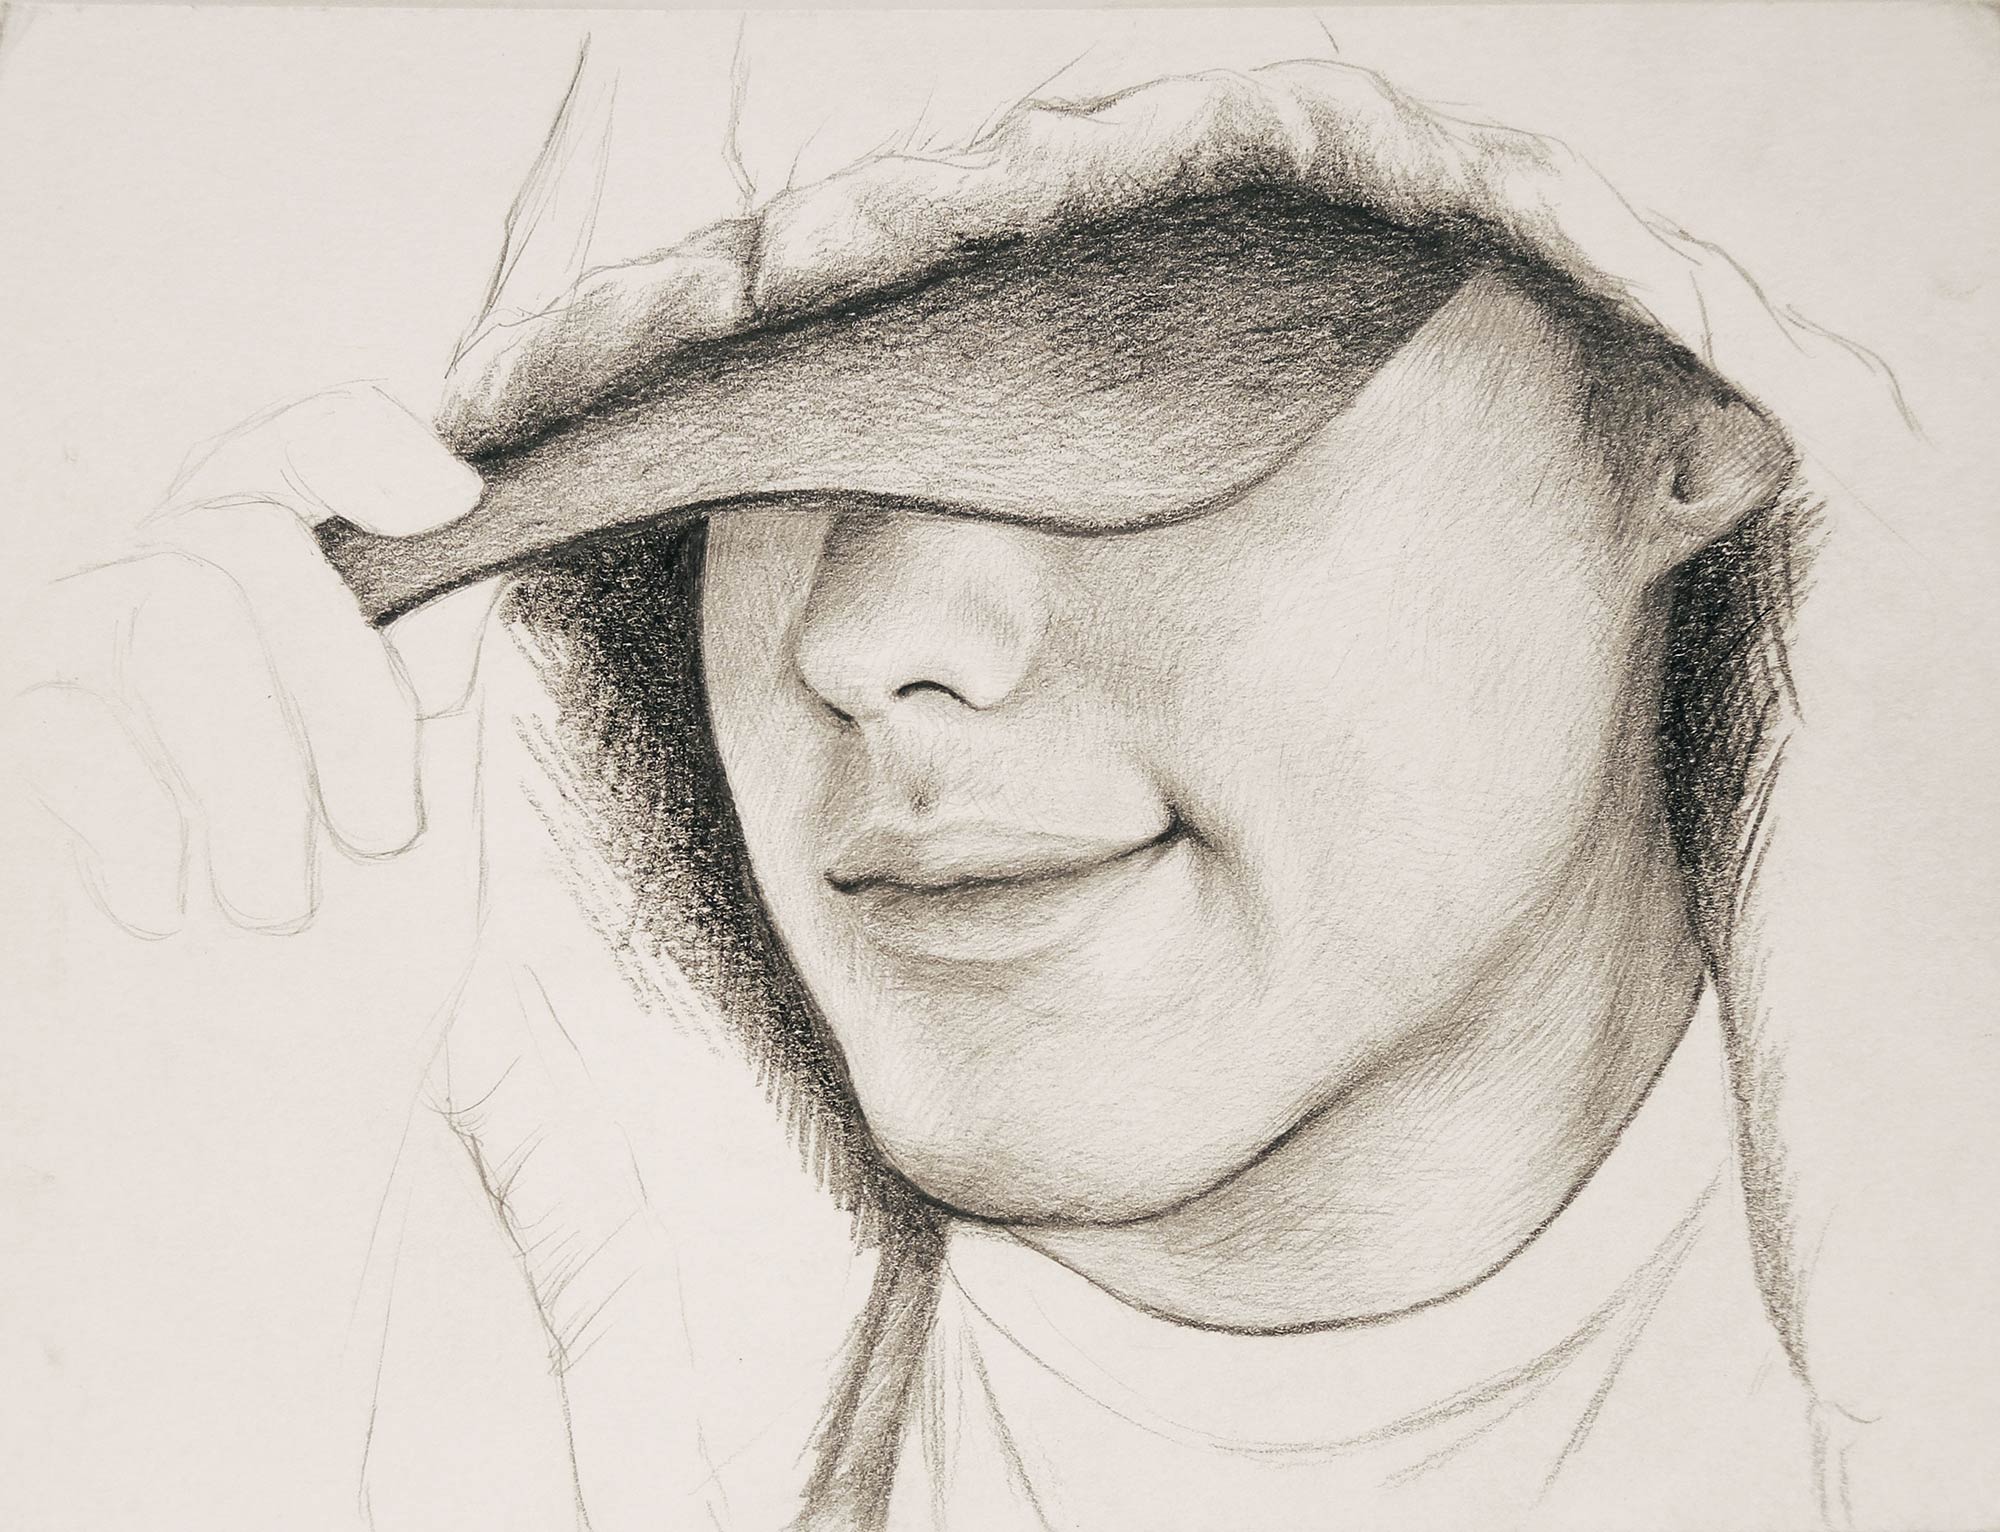 A drawing by Perdong Lin of a face partially obstructed by a baseball cap and hoodie